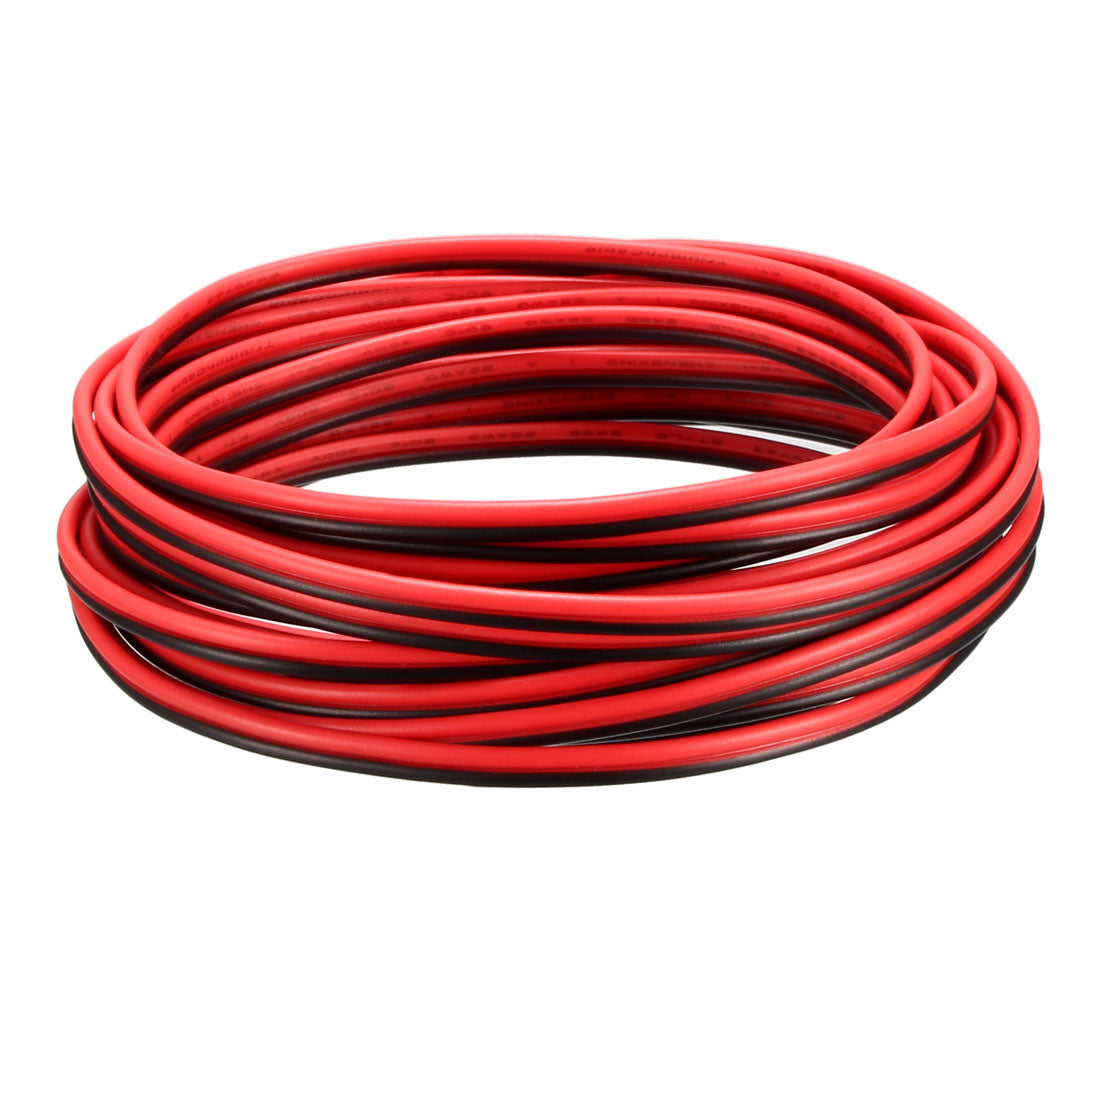 uxcell Uxcell Red Black Wire 2pin Extension Cable Cord 22 AWG Parallel Wire Tin Plated Copper 4M Length for LED Strip Light